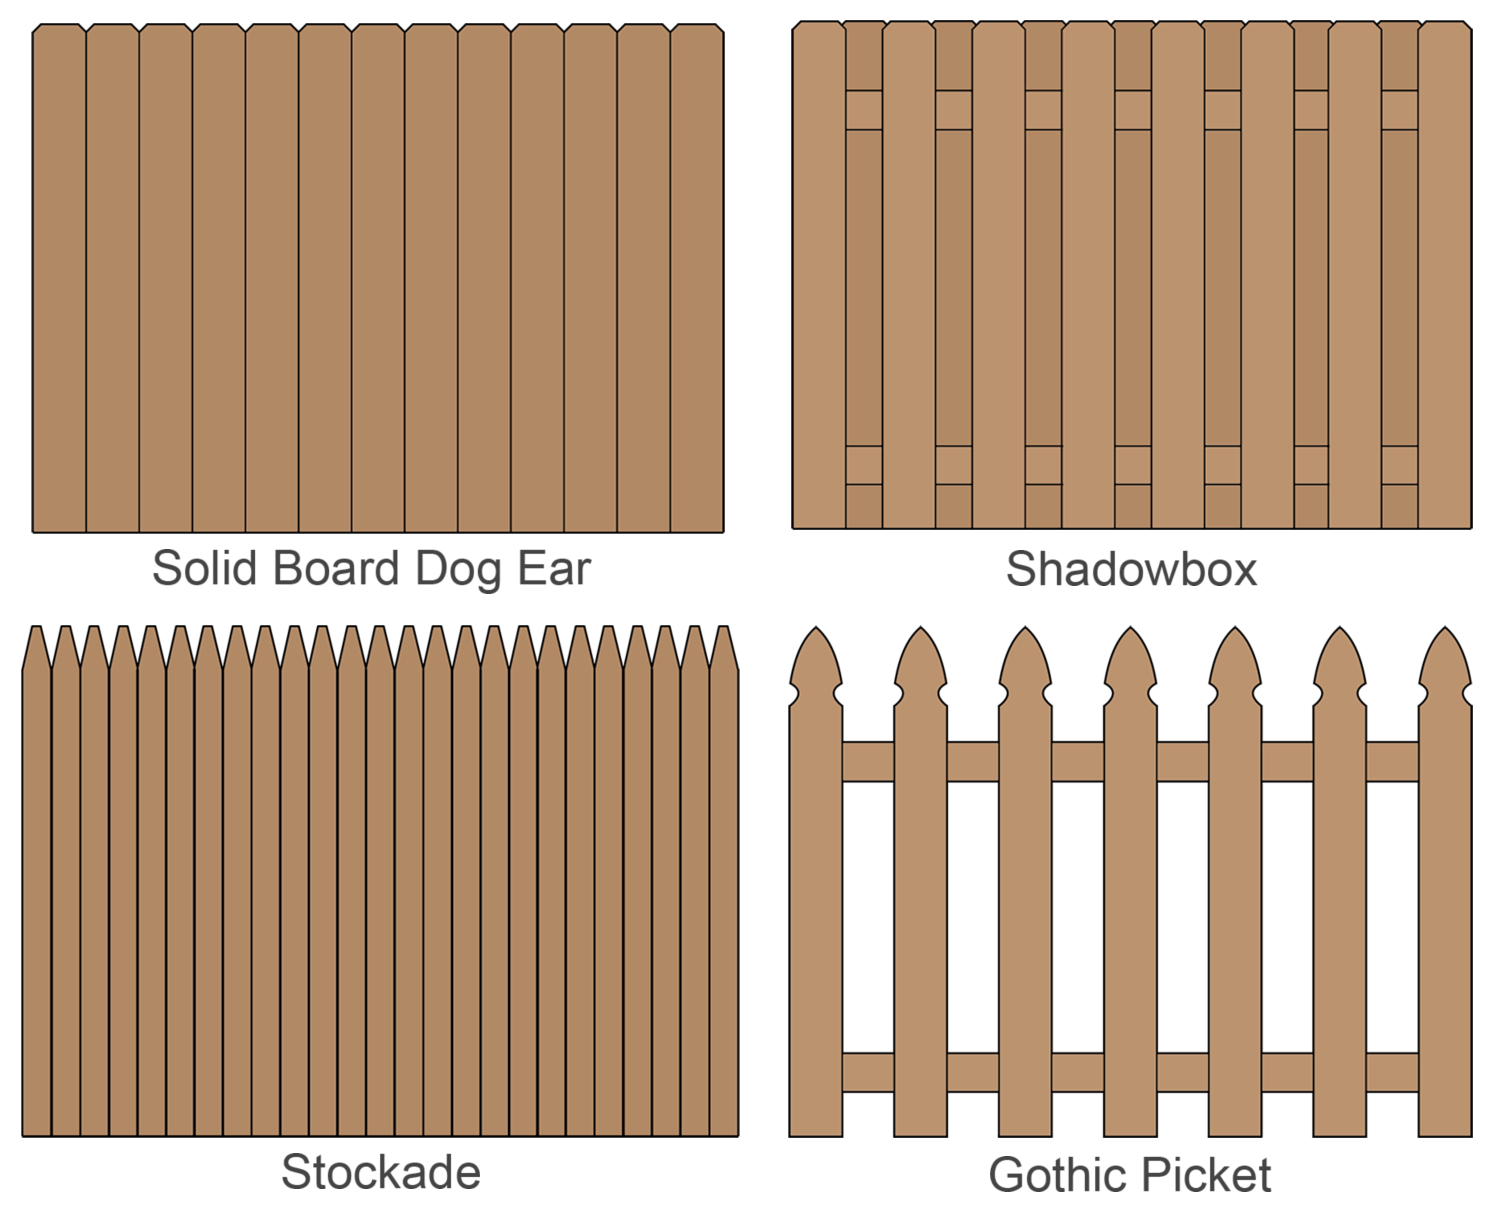 Fence Calculator - Estimate Wood Fencing Materials and Post Centers